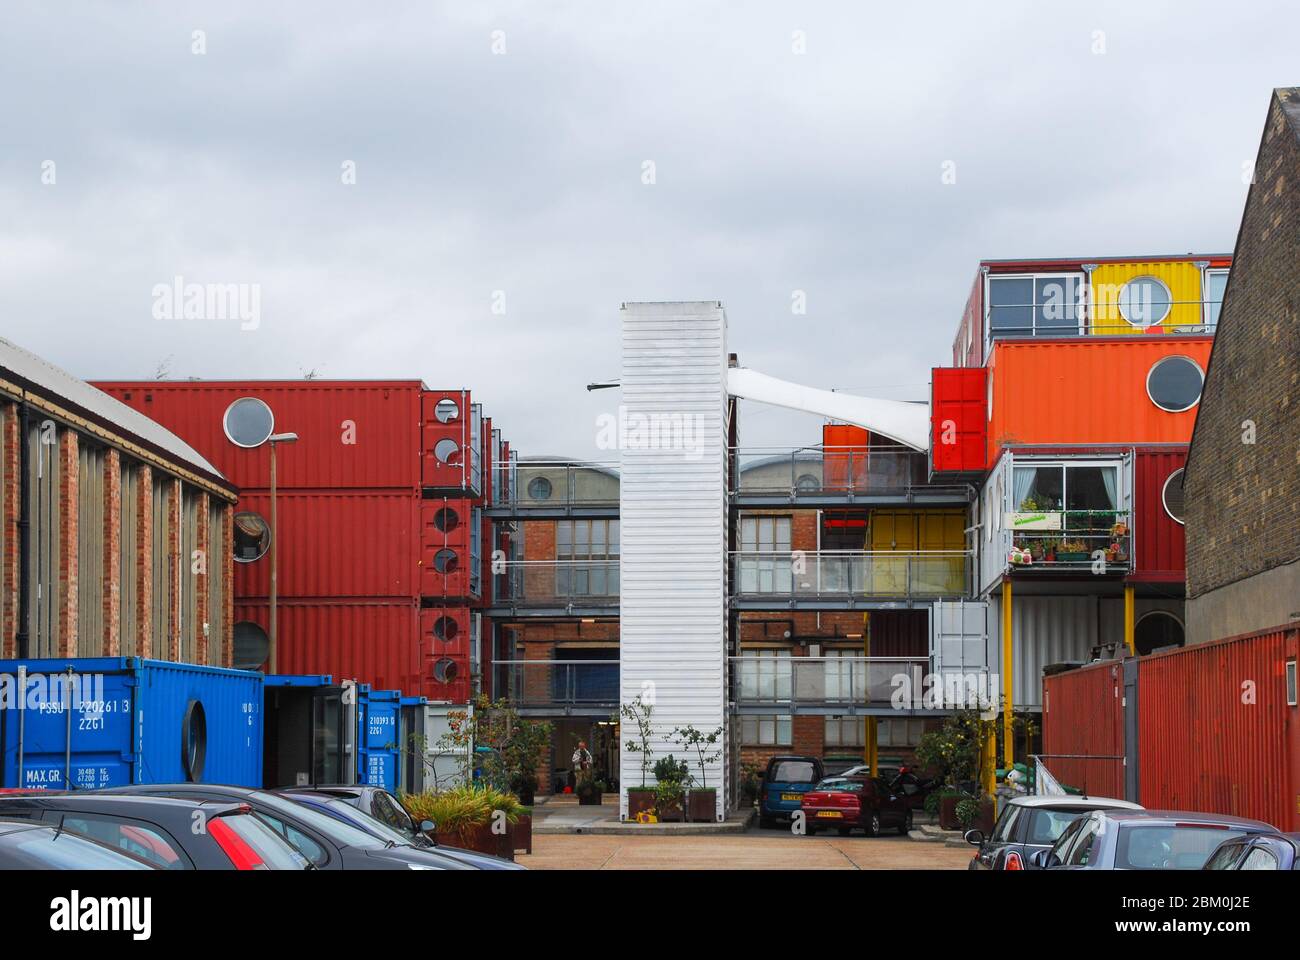 Shipping Containers Colourful Re-Use Accommodation Flexible Low-Cost Housing Container City, 64 Orchard Place, Trinity Buoy Wharf, London E14 0JW Stock Photo